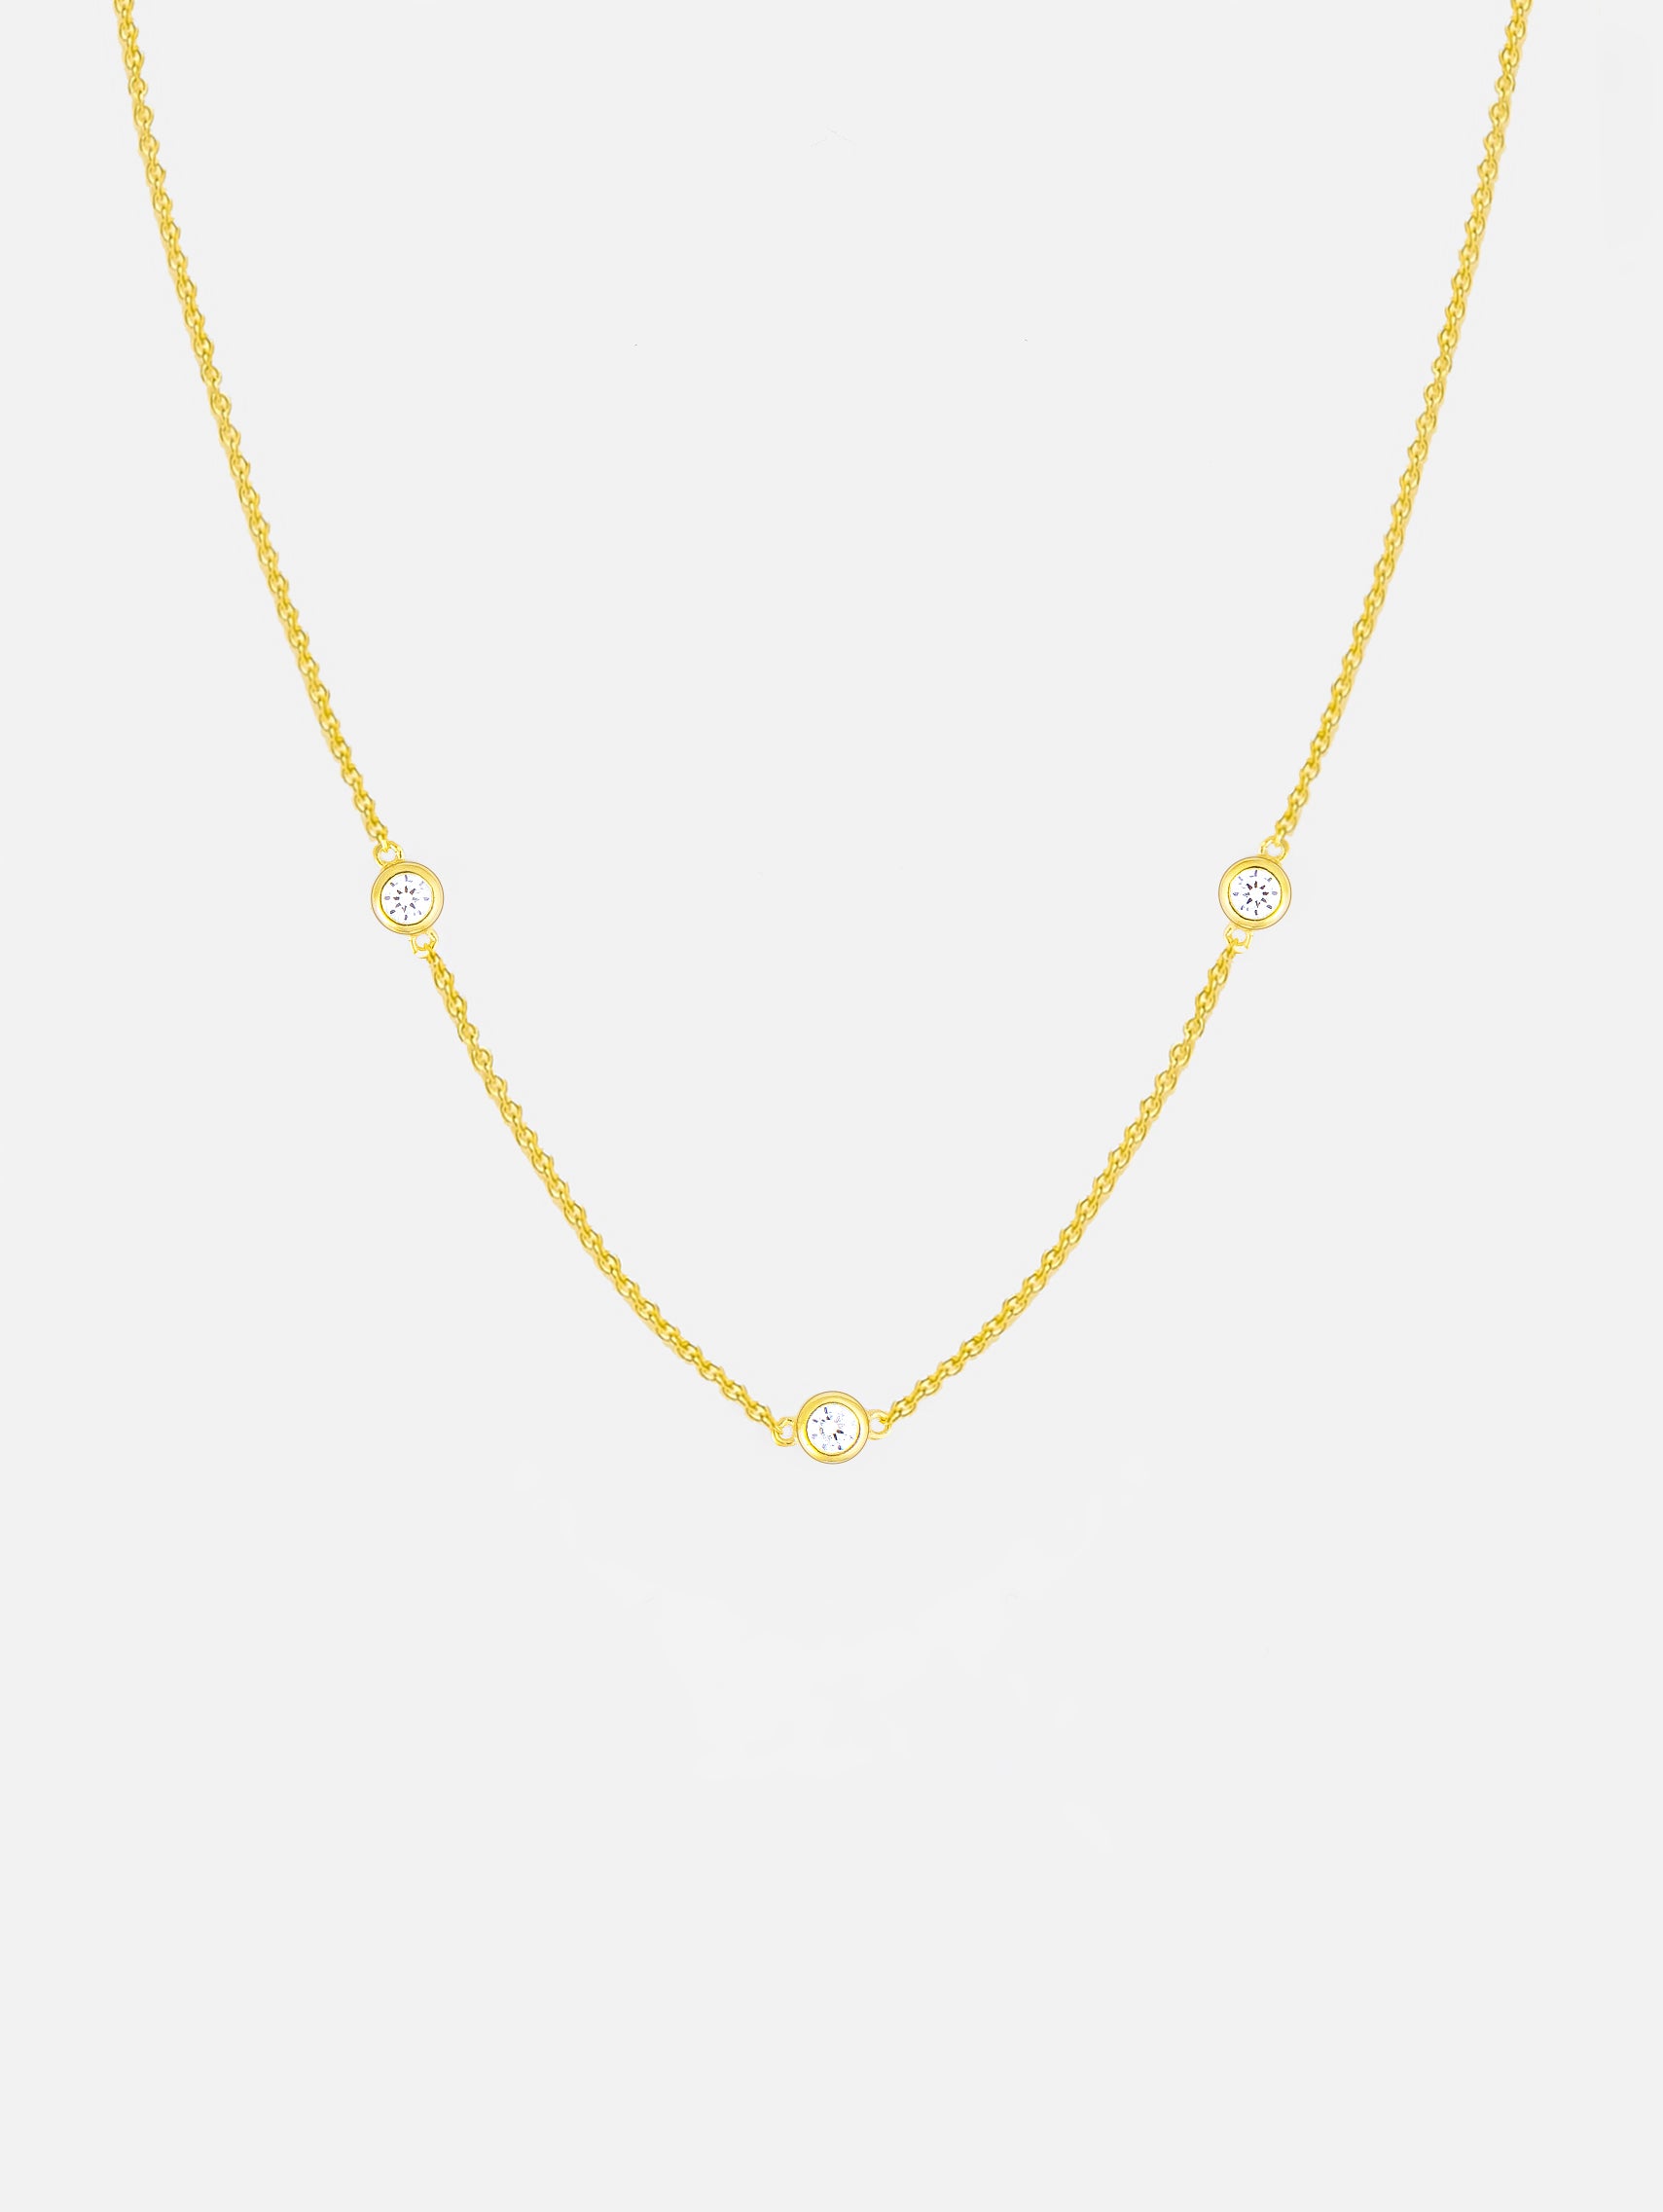 Gold Charm Necklace With Three Stones